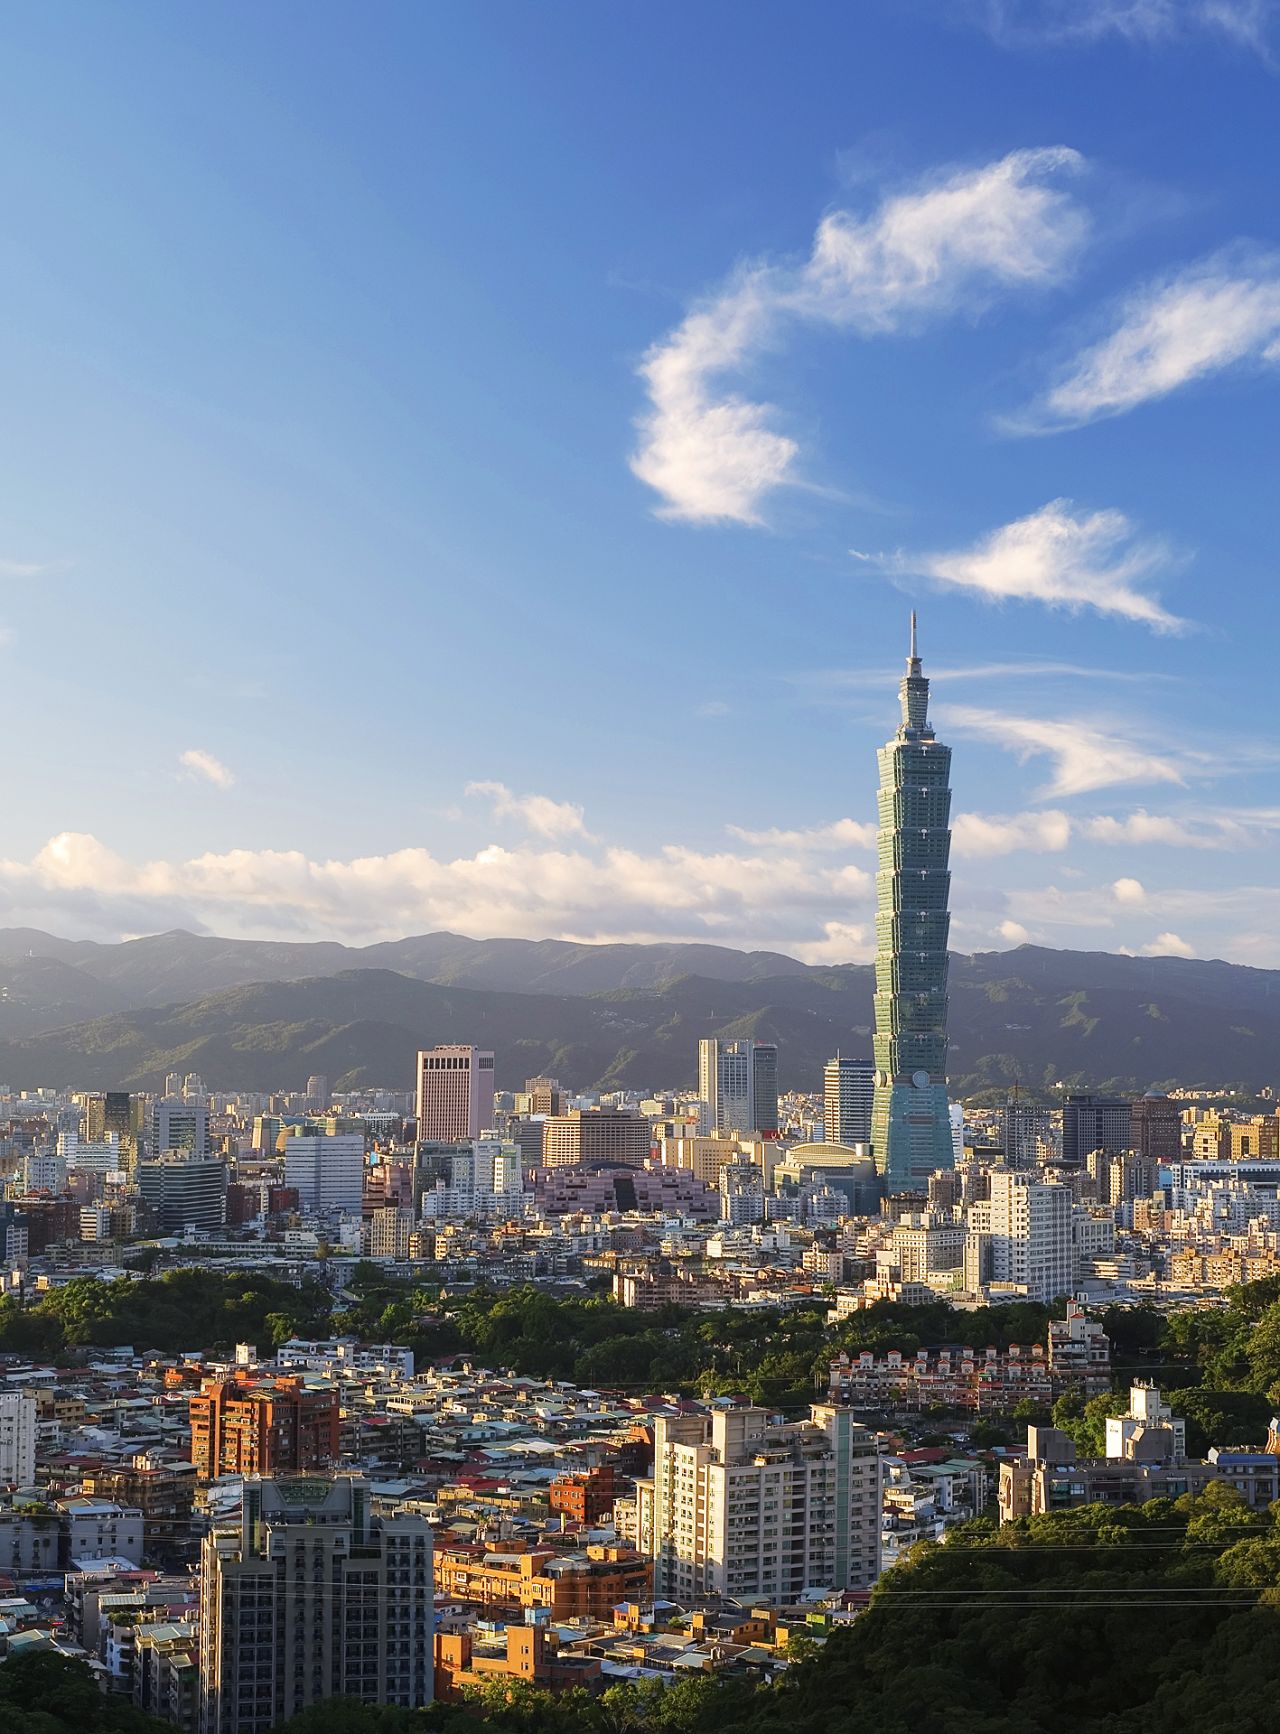 Towering over the capital city, Taipei 101 once held the title of world's tallest building.